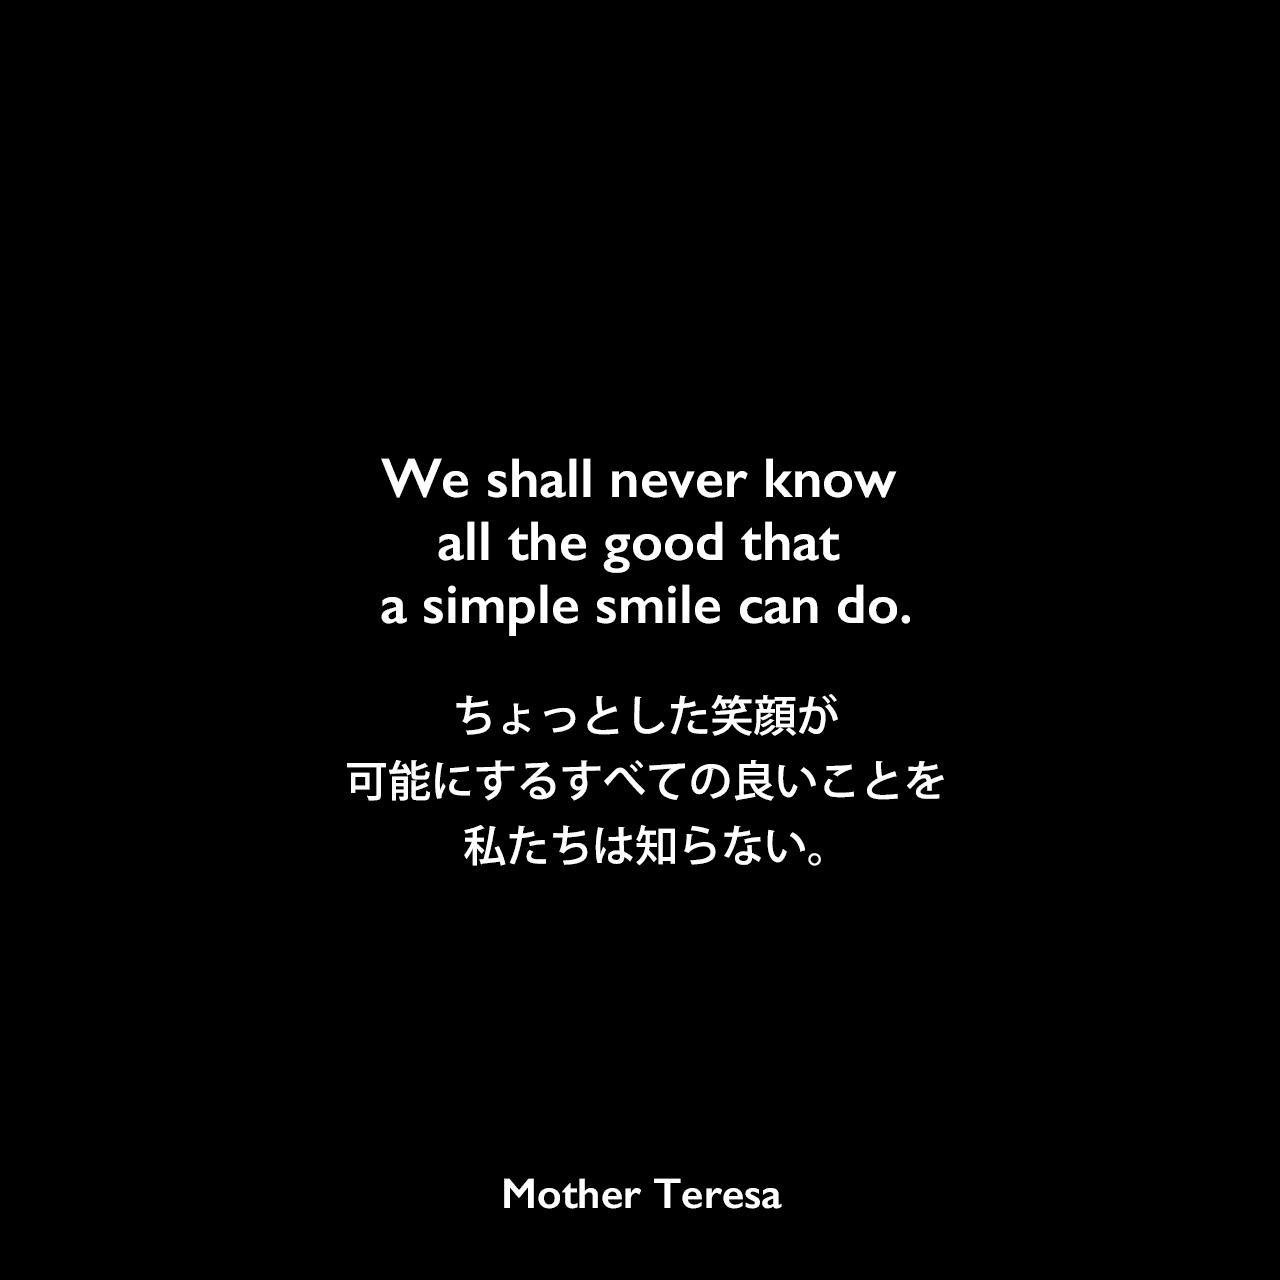 We shall never know all the good that a simple smile can do.ちょっとした笑顔が可能にするすべての良いことを私たちは知らない。